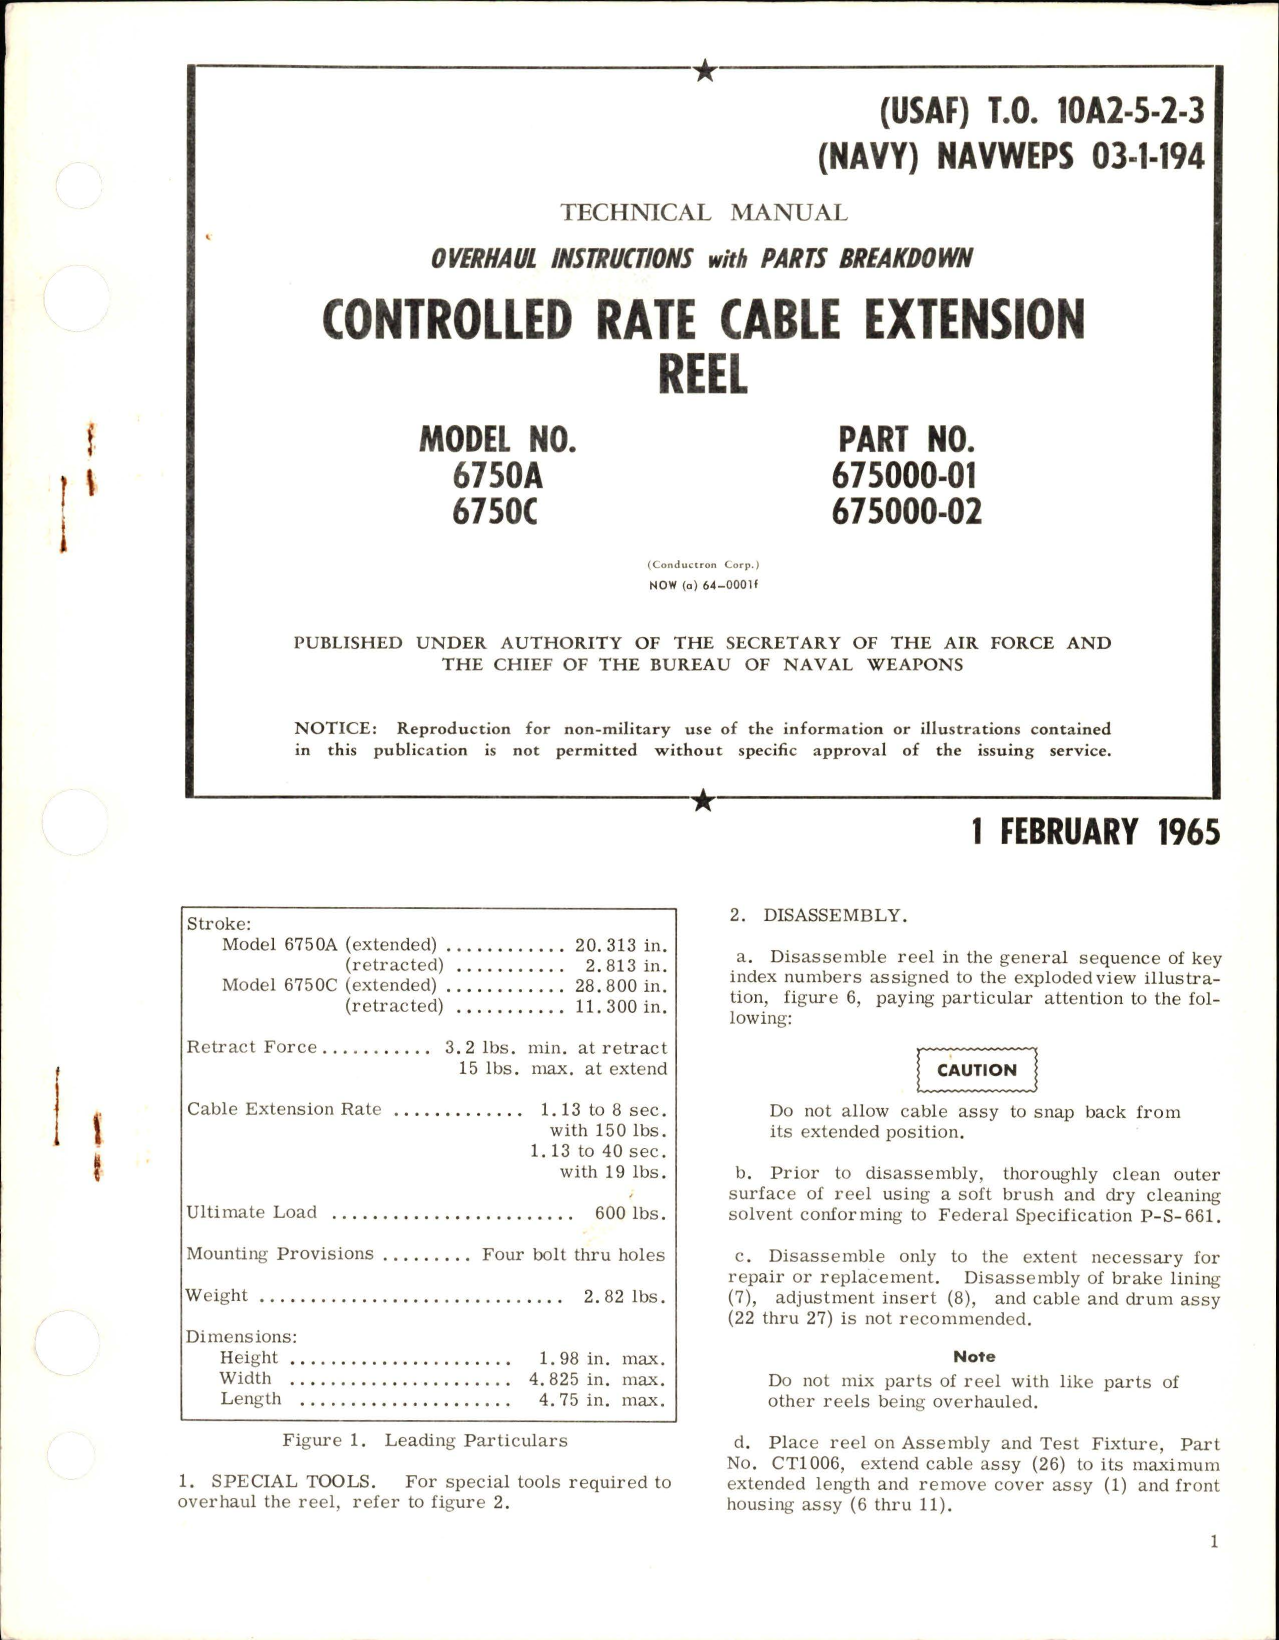 Sample page 1 from AirCorps Library document: Overhaul Instructions with Parts Breakdown for Controlled Rate Cable Extension Reel - Model 6750A and 6750C